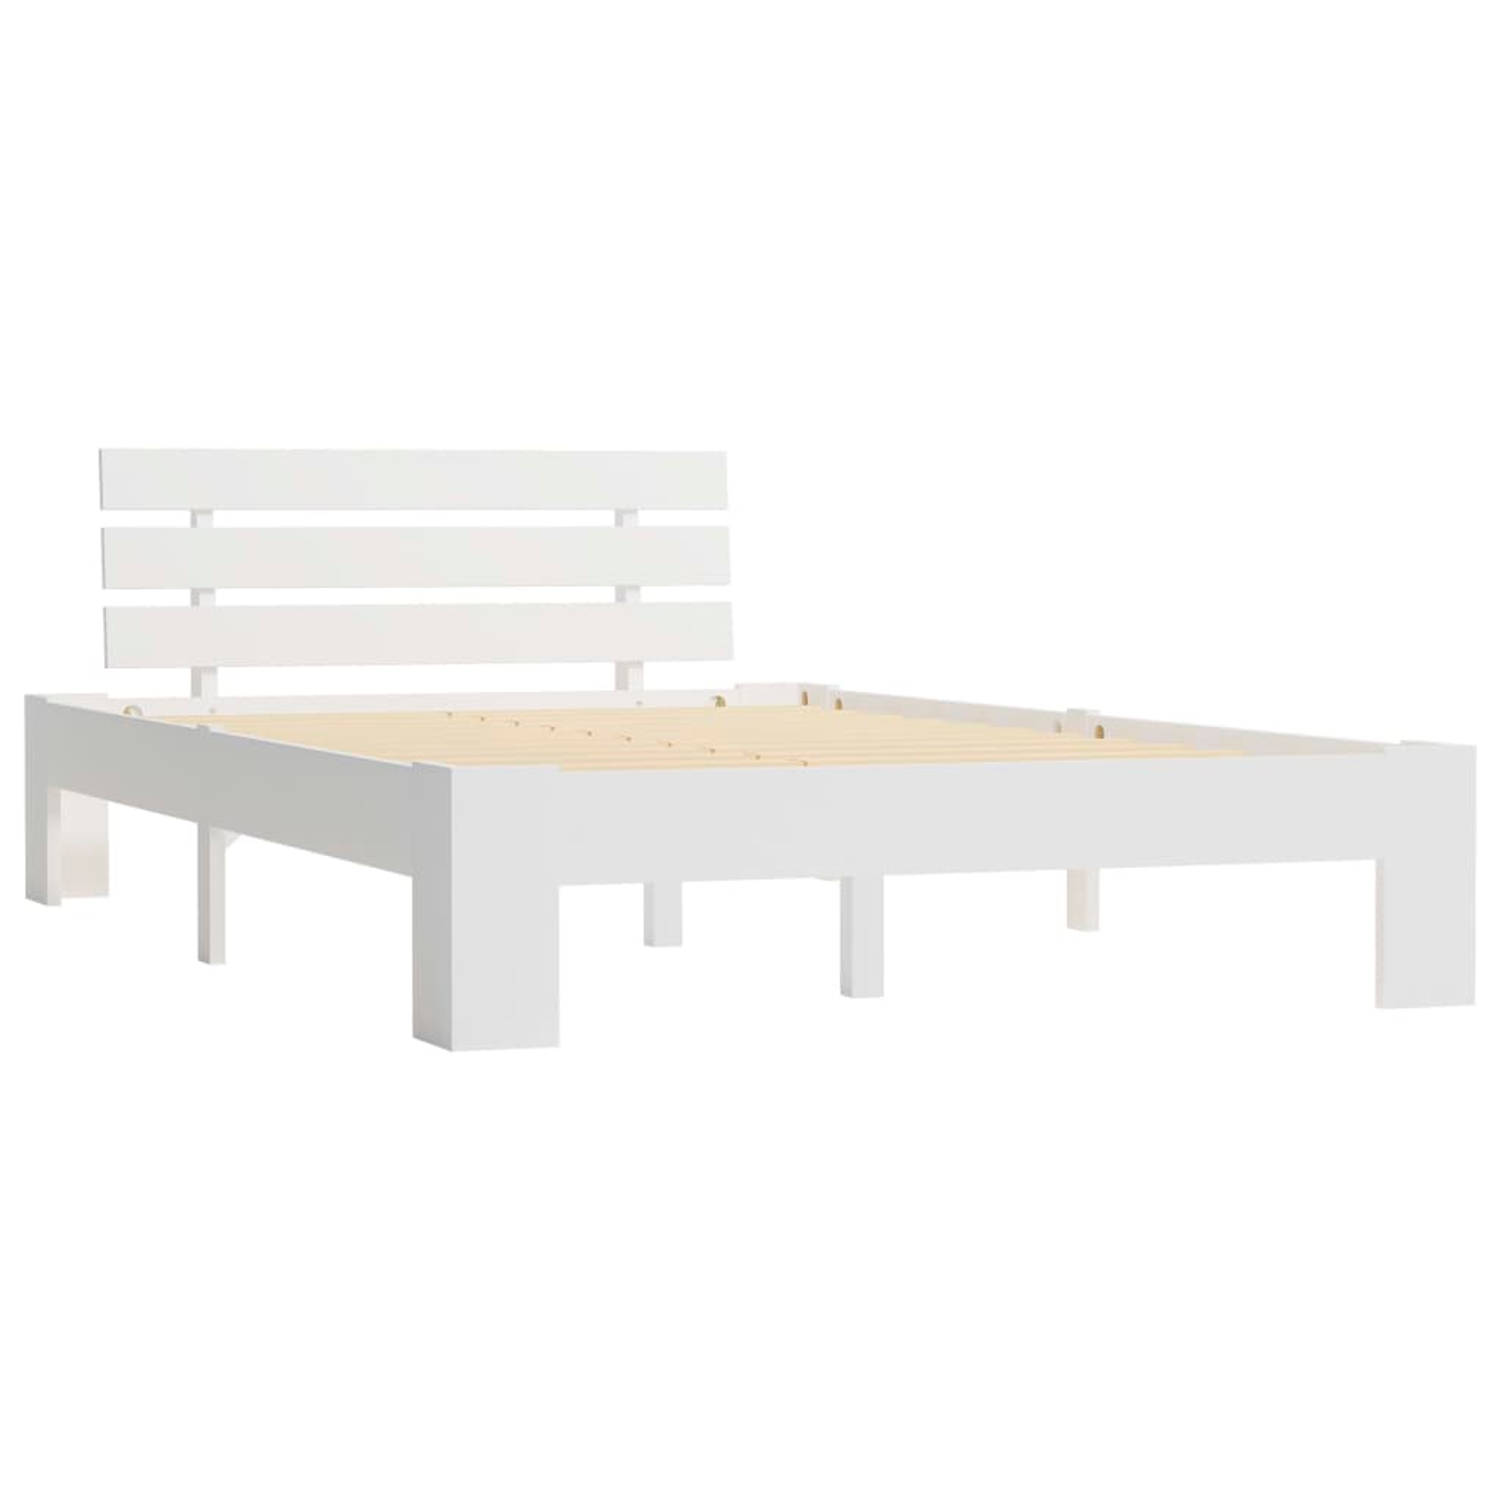 The Living Store Bedframe massief grenenhout wit 120x200 cm - Bed